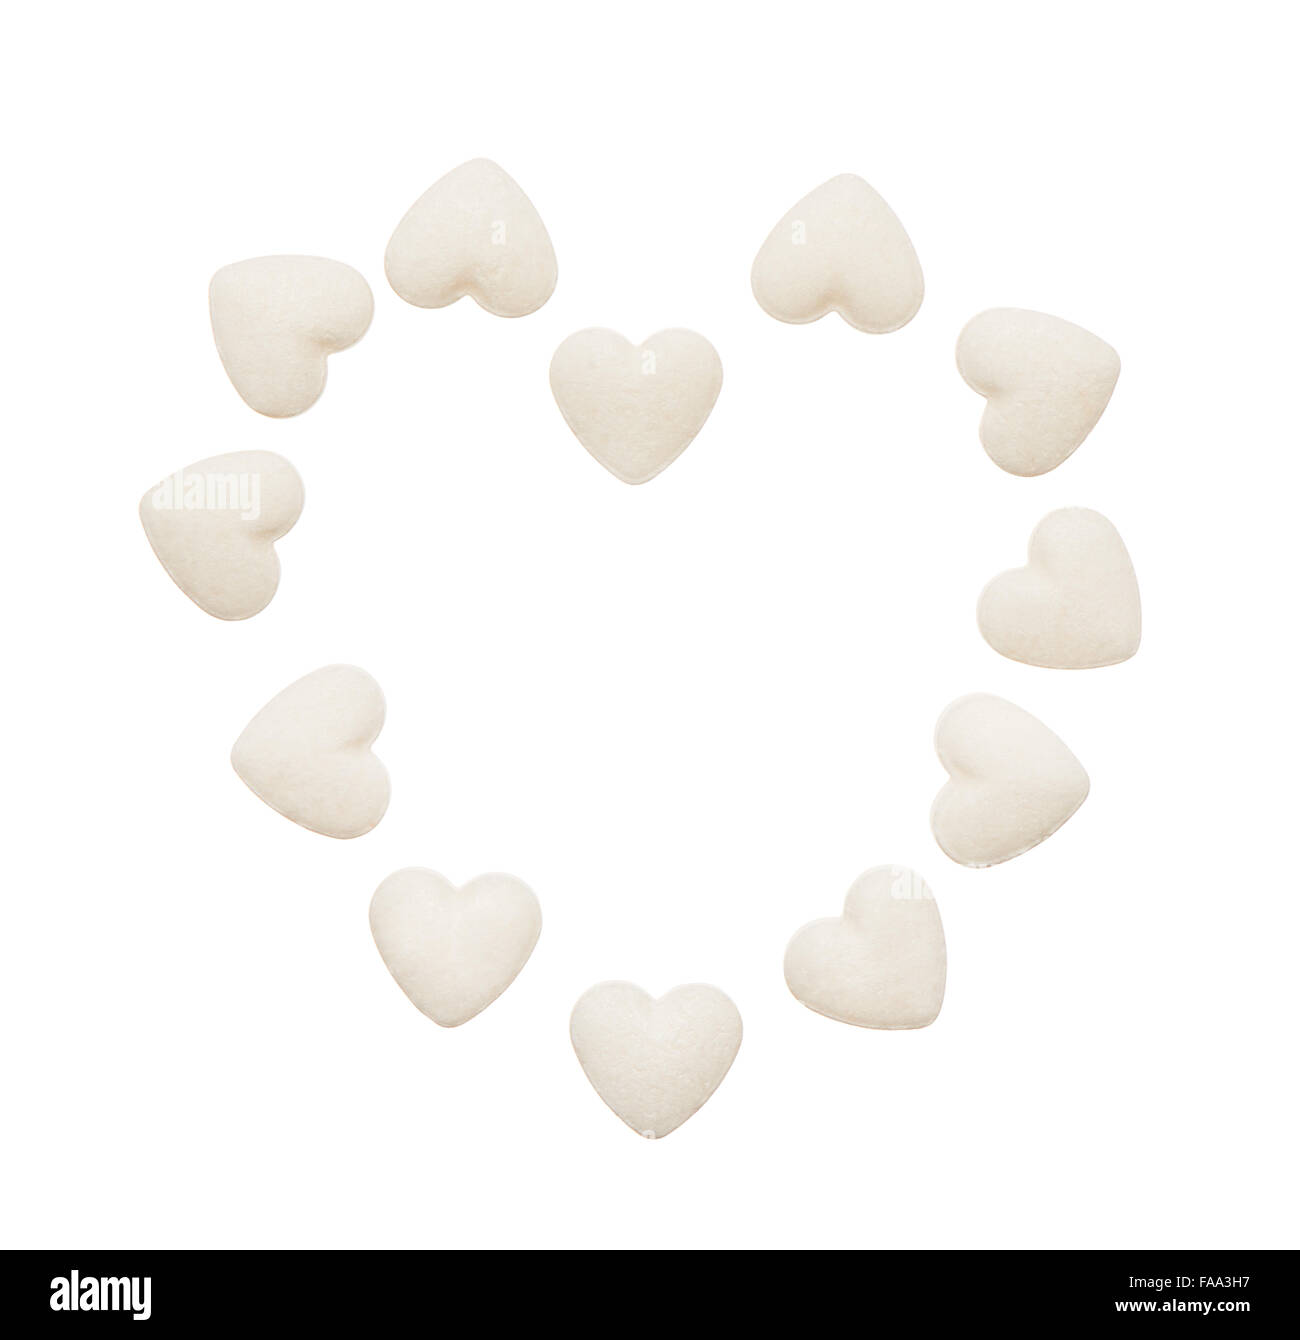 Heart made of white heart shape tablets isolated on white background. Clipping path included. Stock Photo